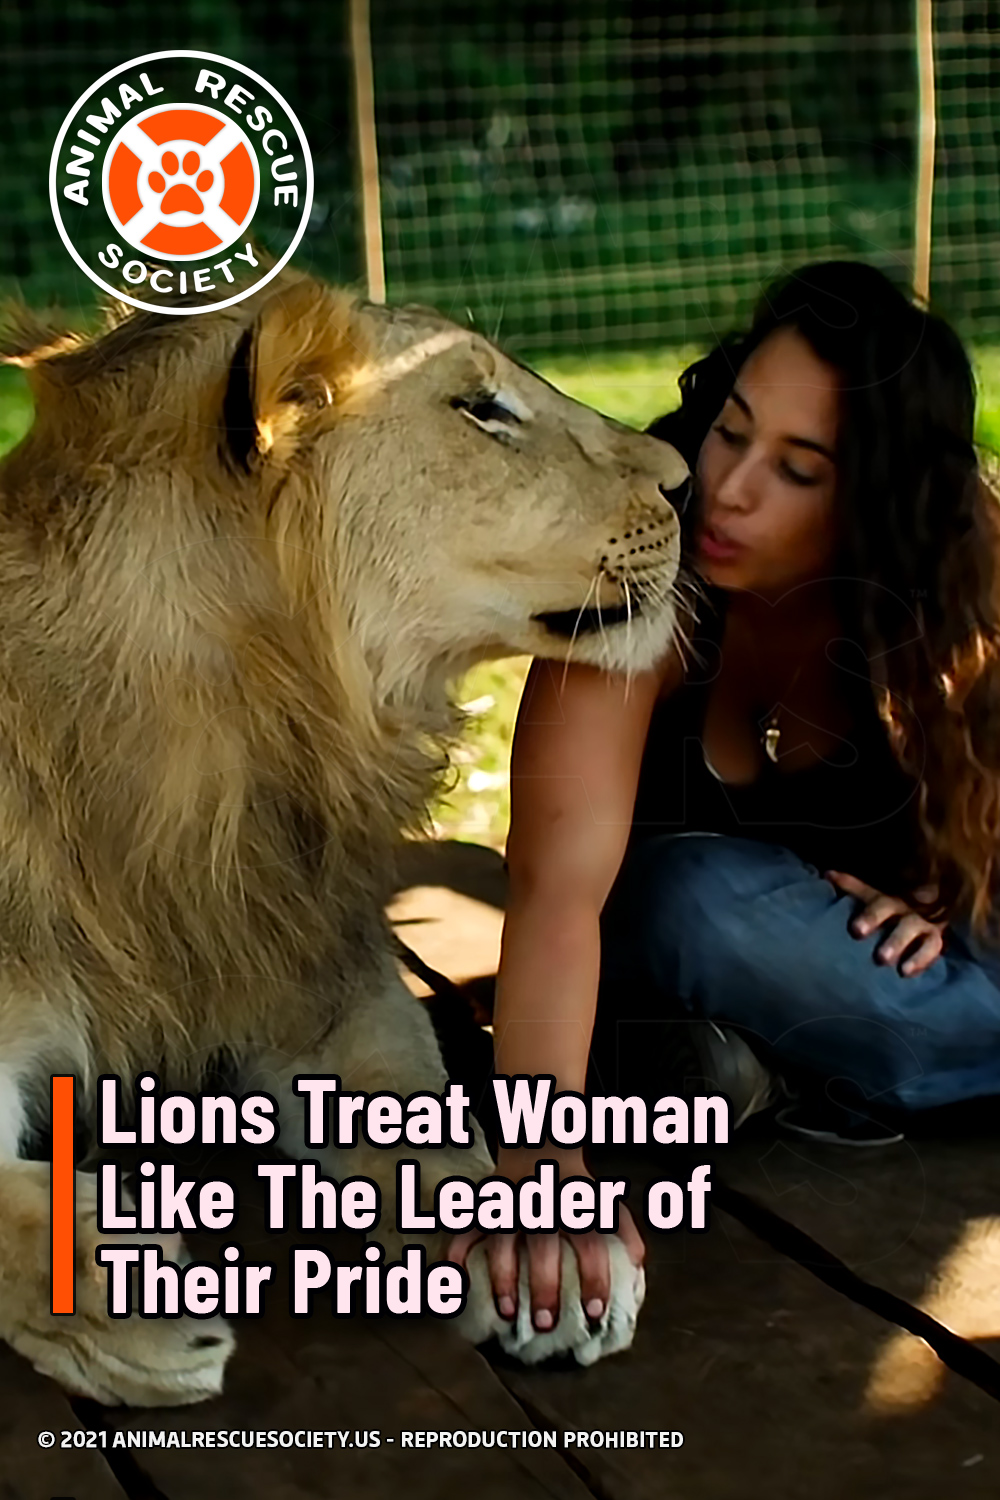 Lions Treat Woman Like The Leader of Their Pride